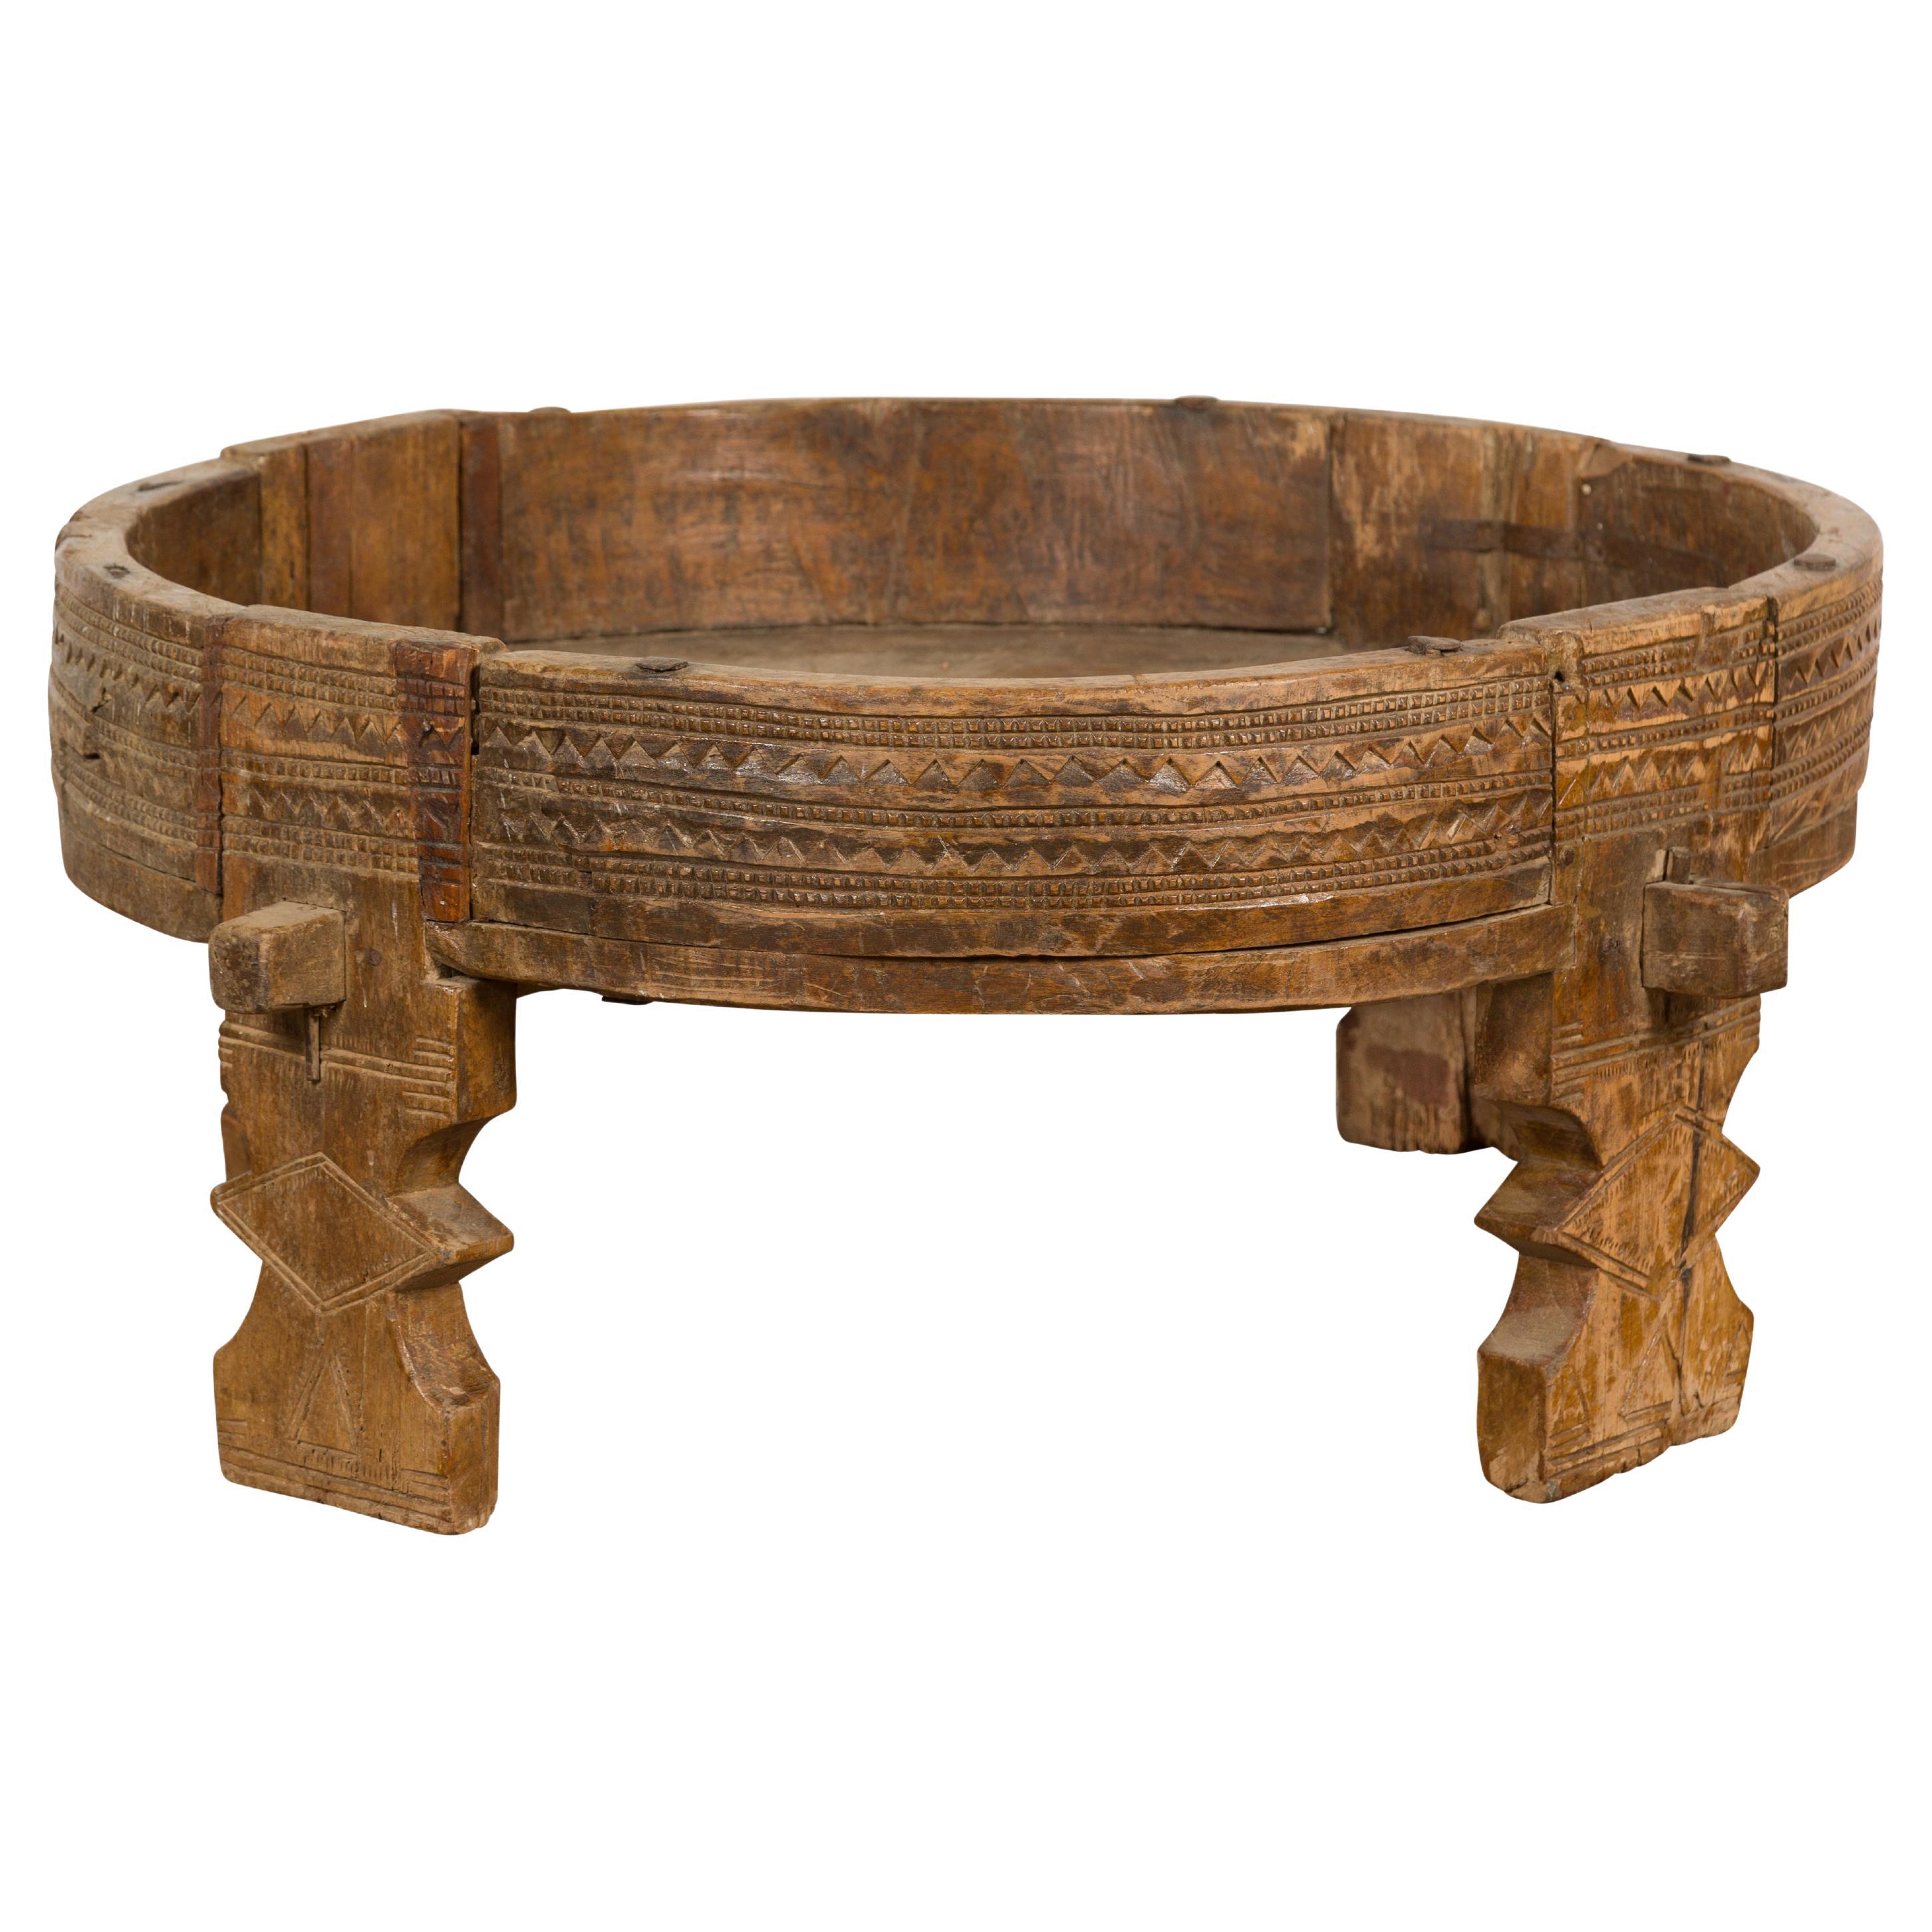 Tribal Indian 1920s Teak Chakki Grinding Table with Geometric Carved Motifs For Sale